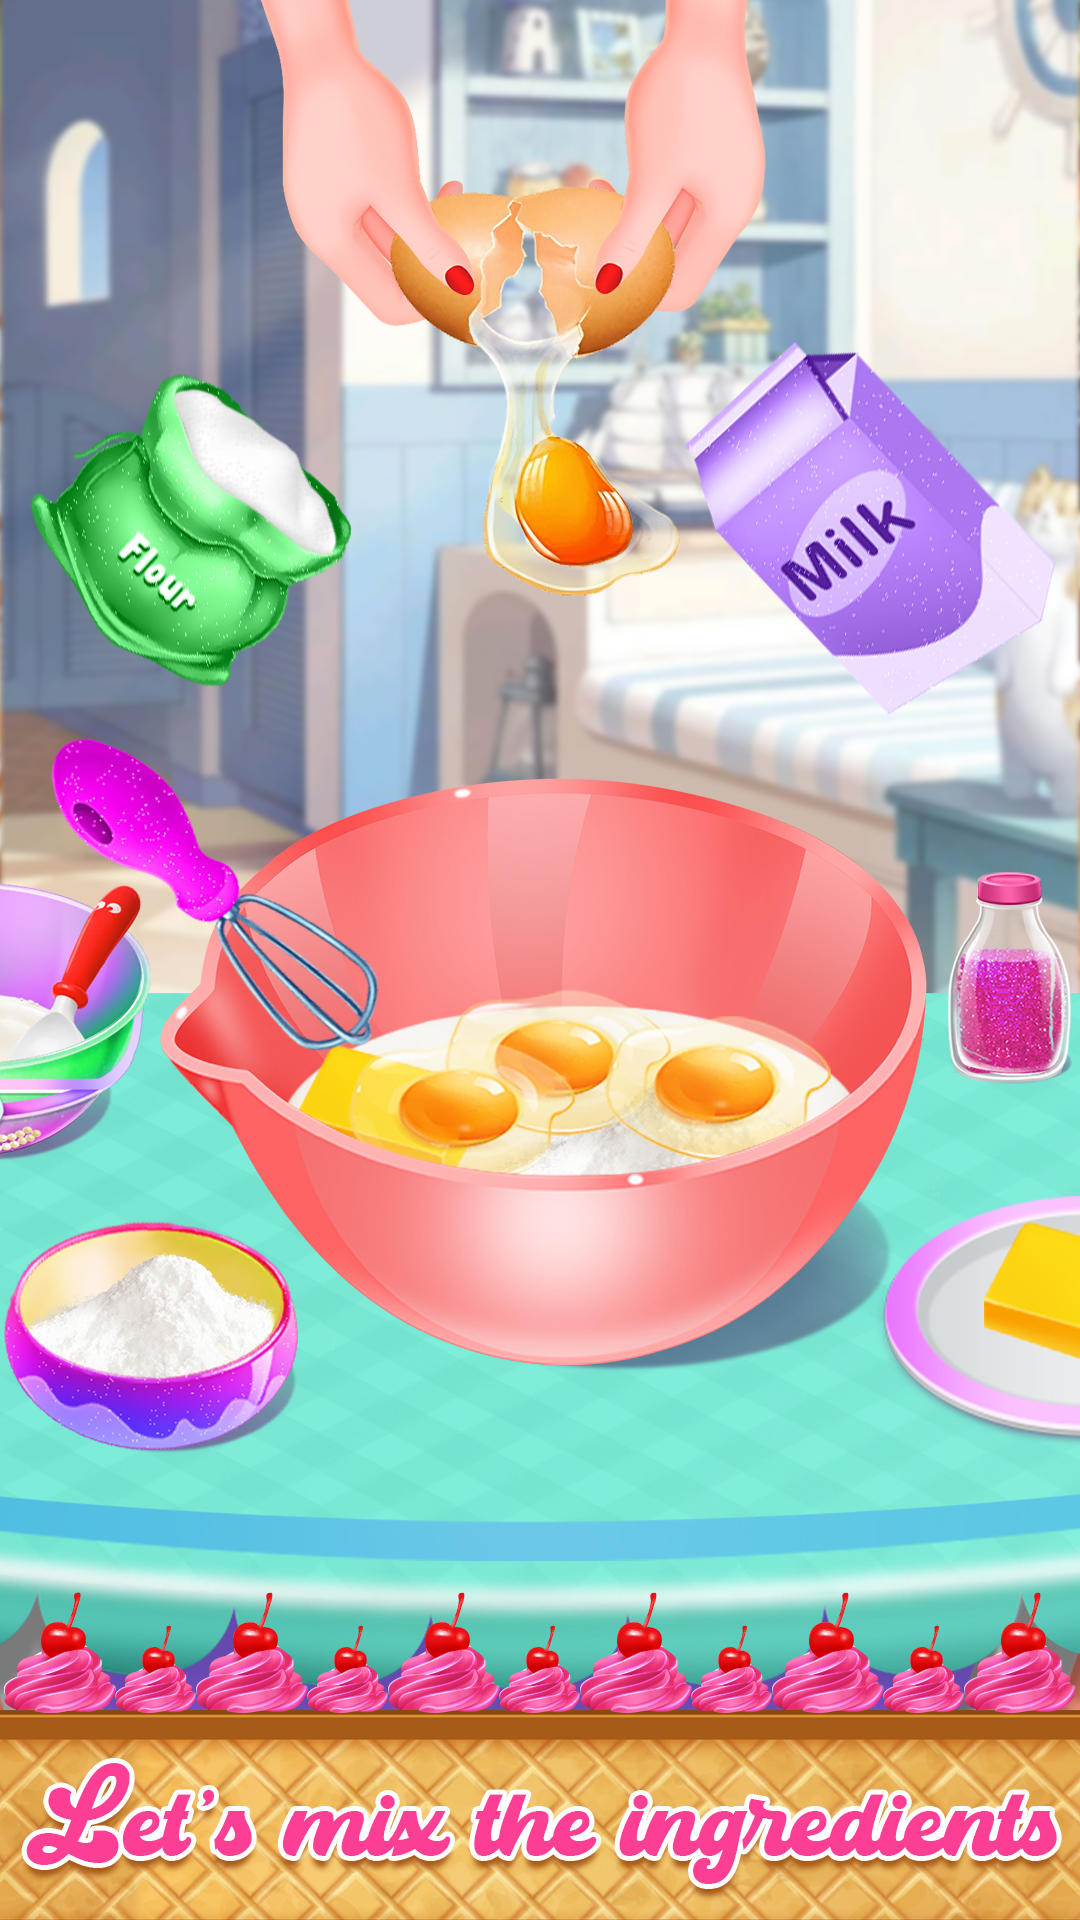 Cake Decorating - Free Play & No Download | FunnyGames